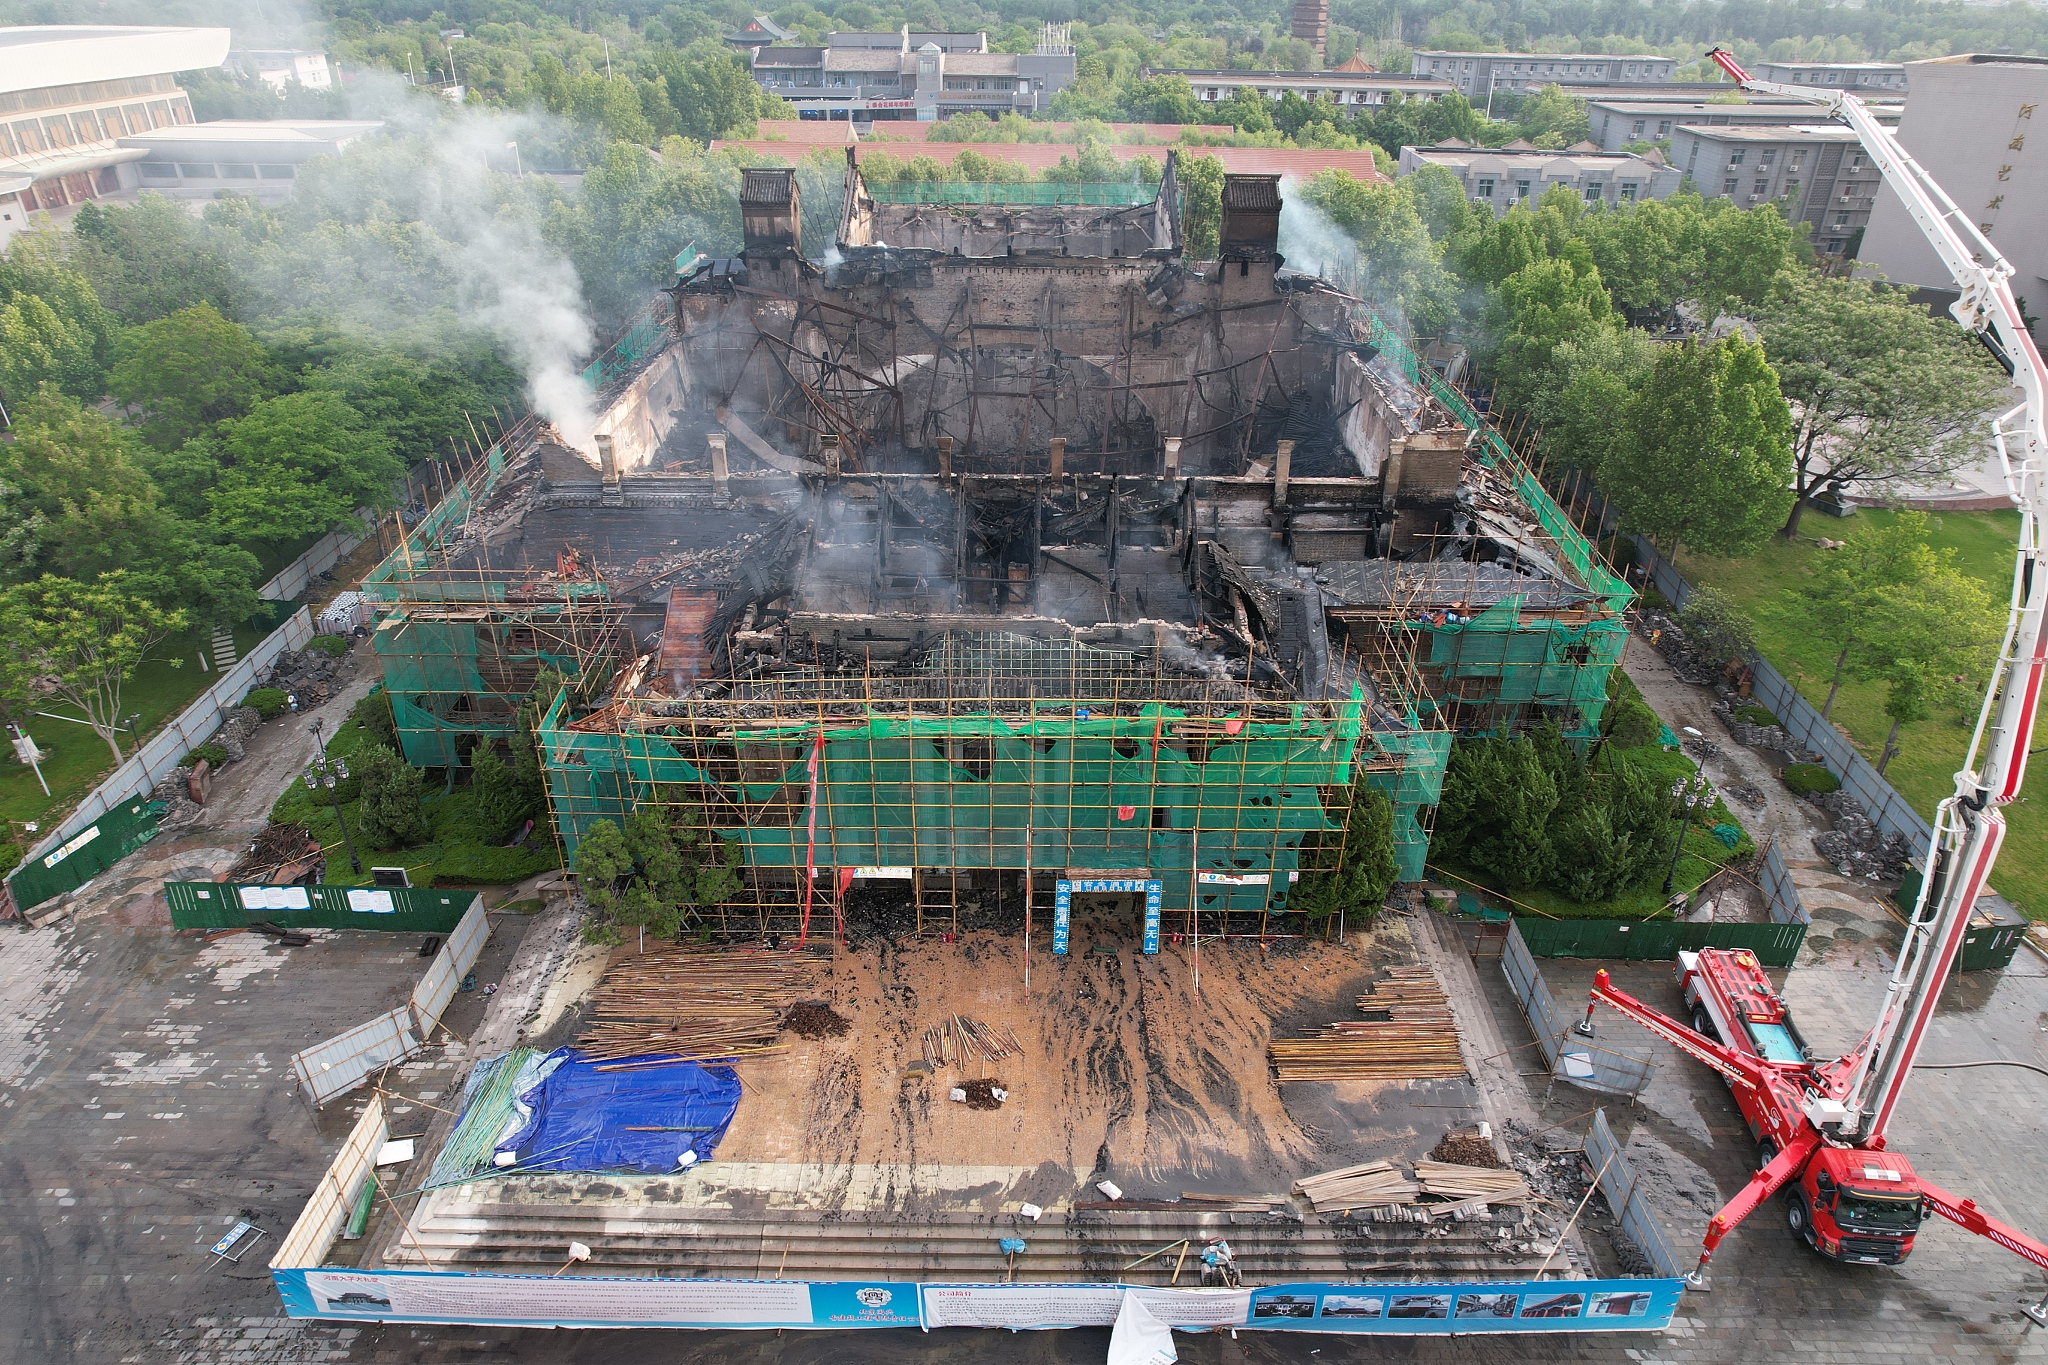 State Council to oversee probe into university fire in central China